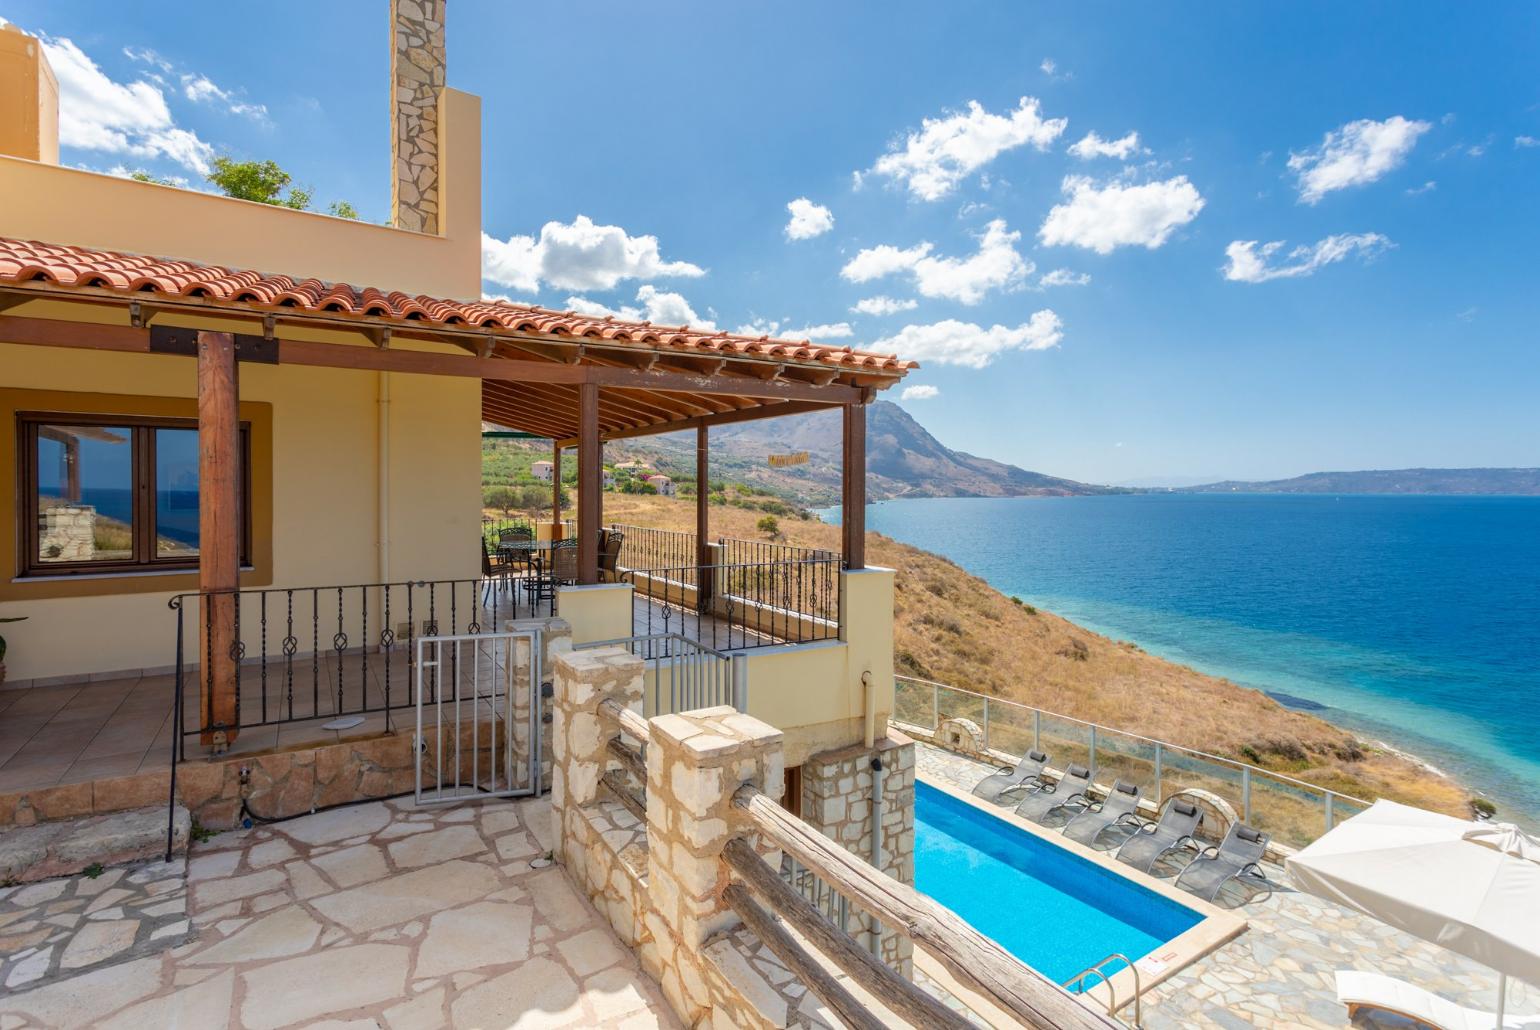 Beautiful villa with private pool, terrace, and panoramic sea views